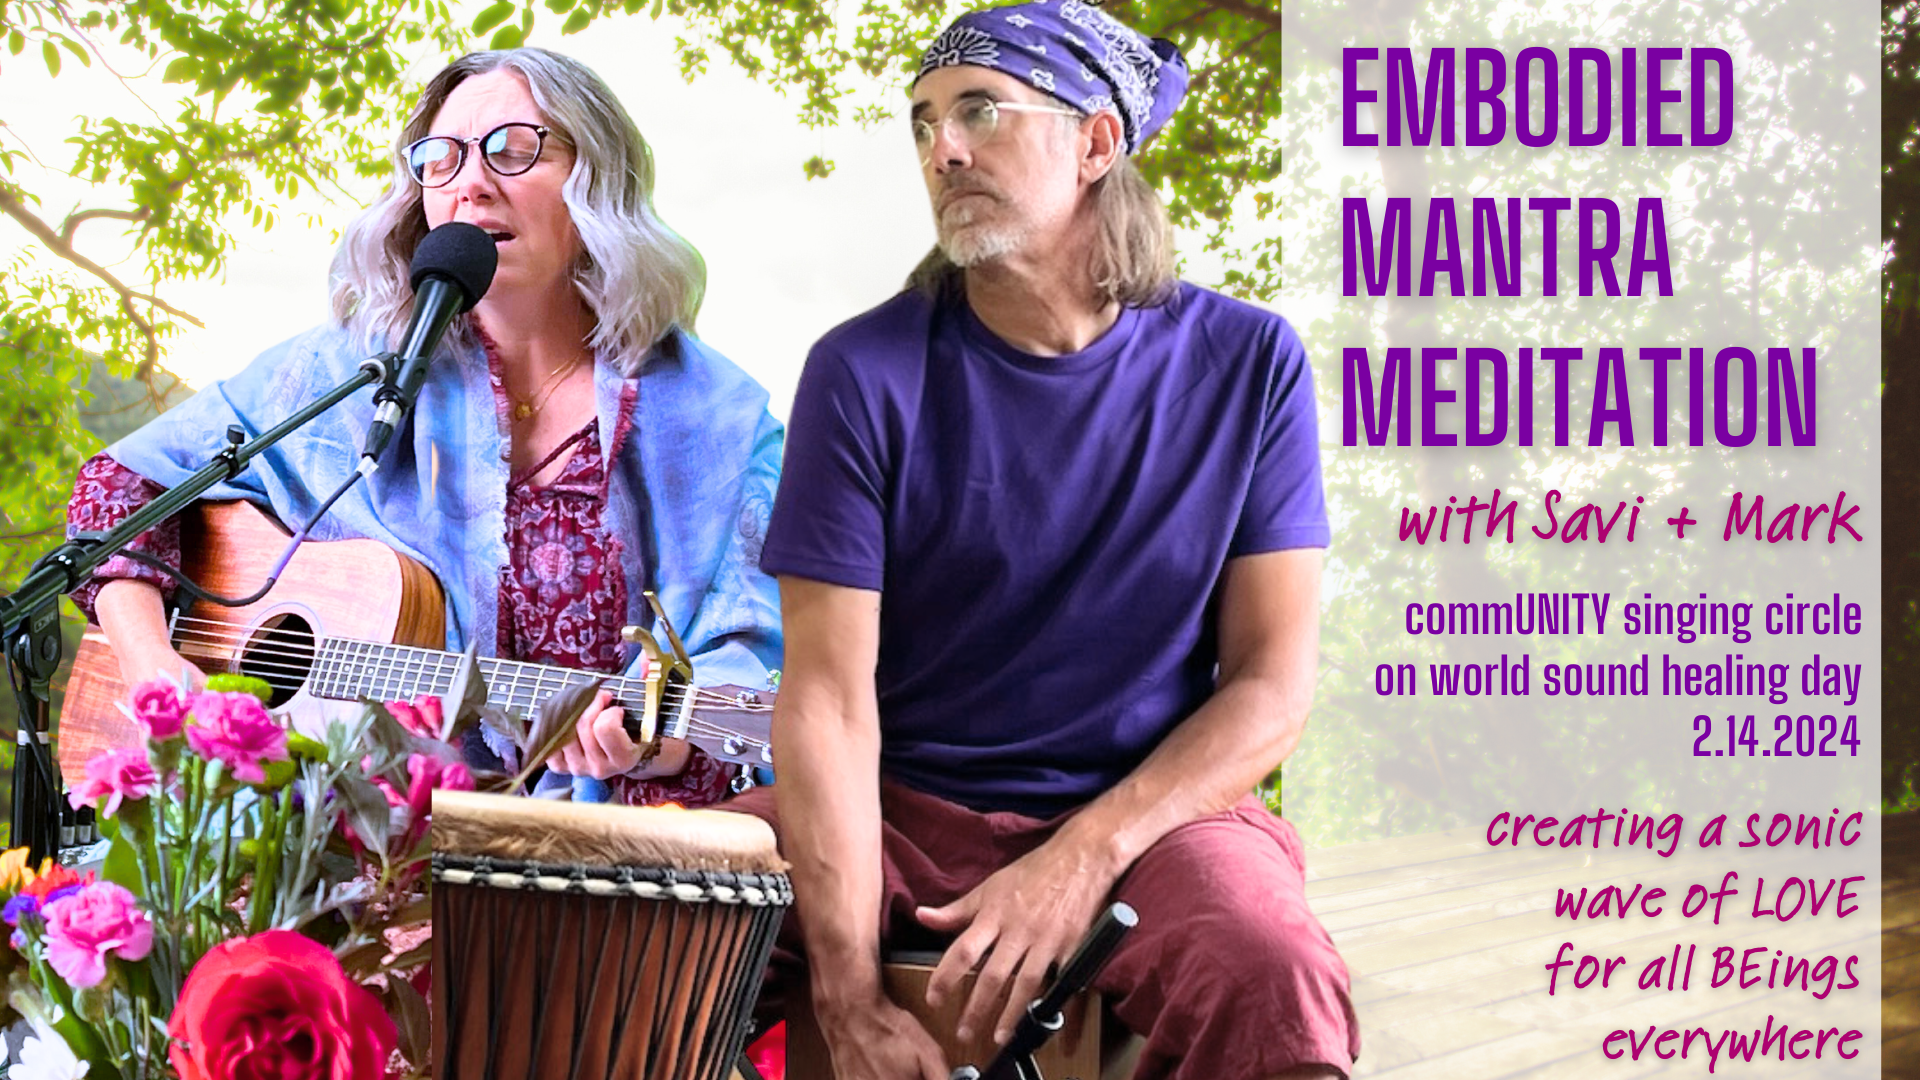 Embodied Mantra Meditation for World Sound Healing Day